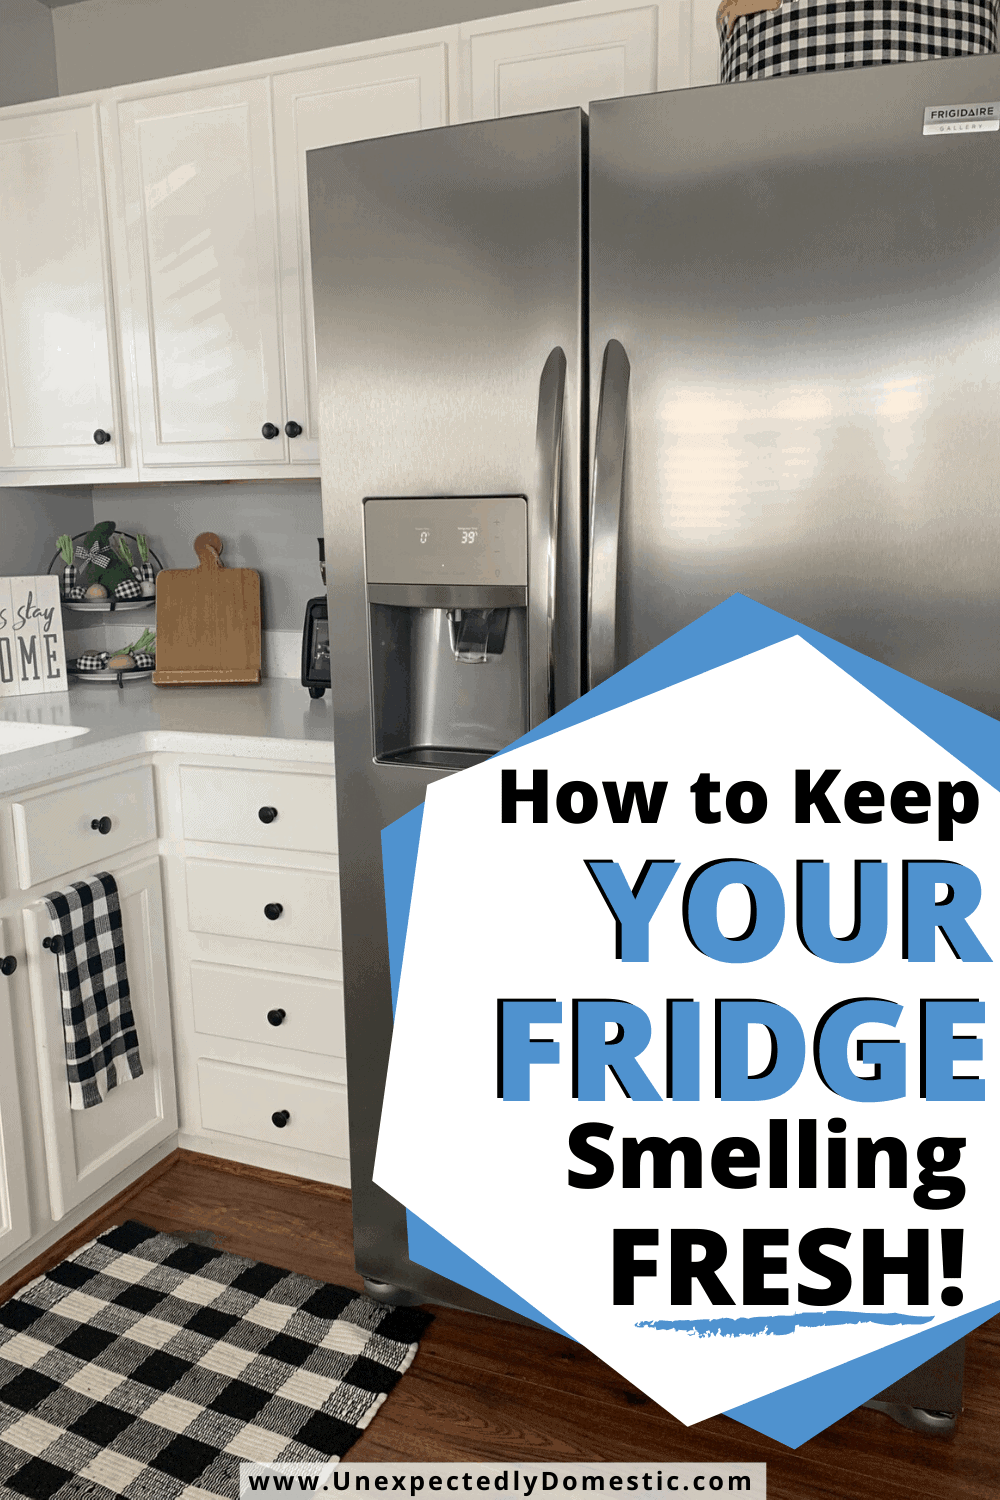 How to keep your fridge smelling fresh! 10 easy ways to deodorize your refrigerator naturally, and remove those bad odors for good.